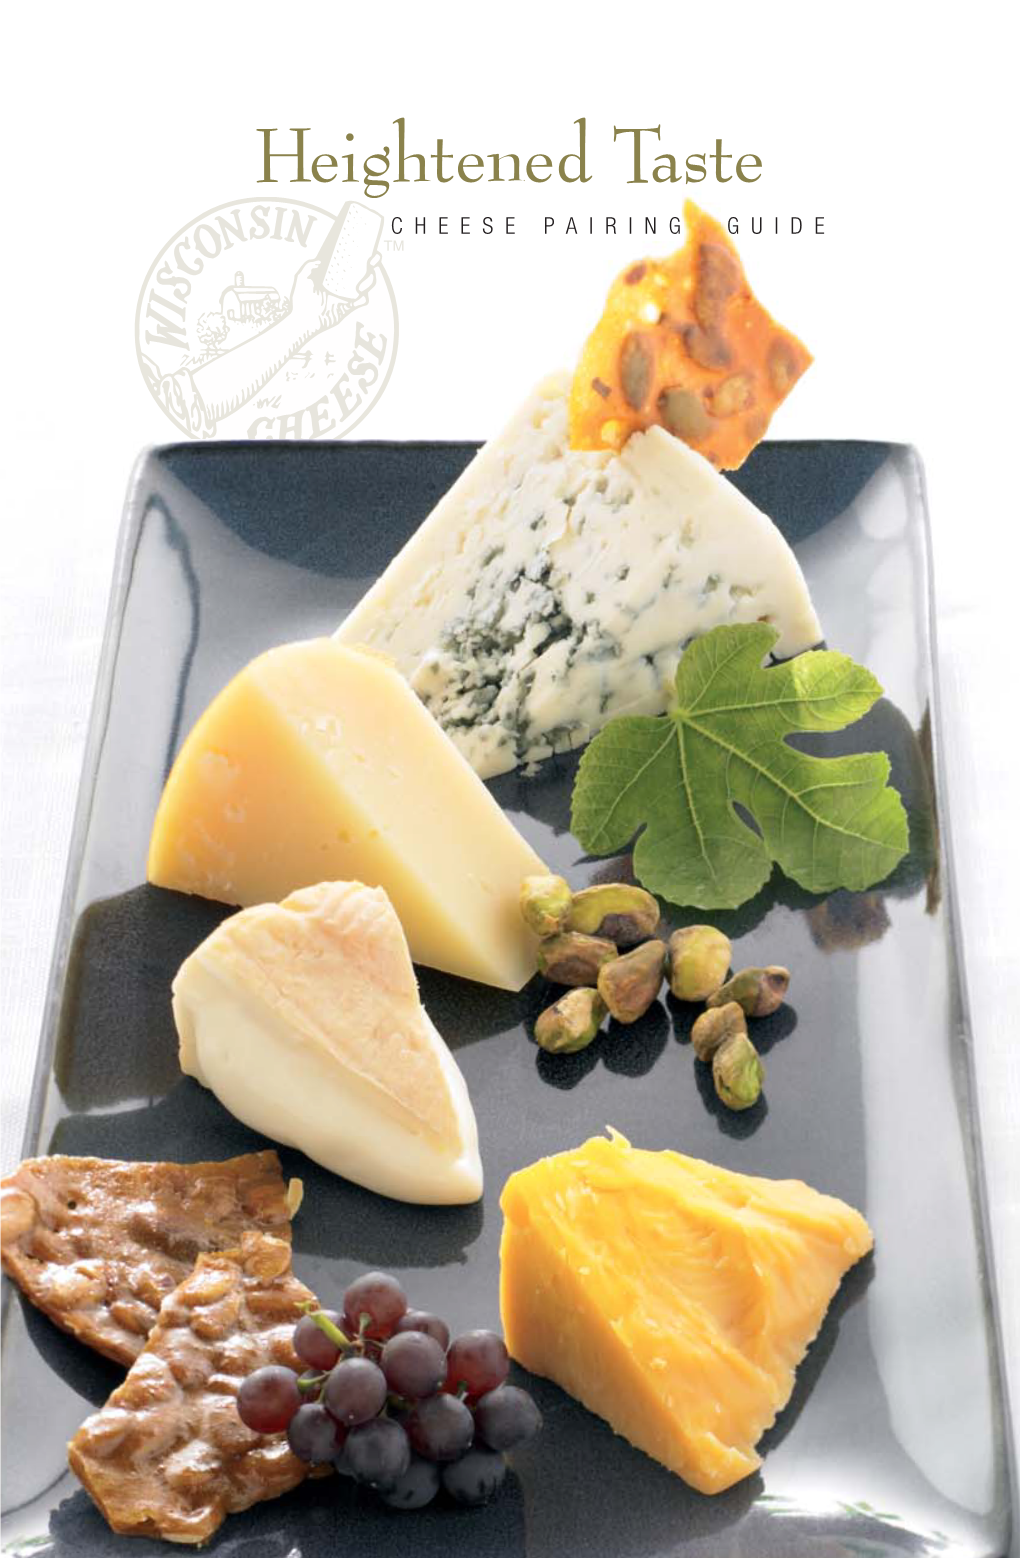 Heightened Taste CHEESE PAIRING GUIDE Few Foods Are More Luxurious Than an Expertly Crafted Piece of Cheese